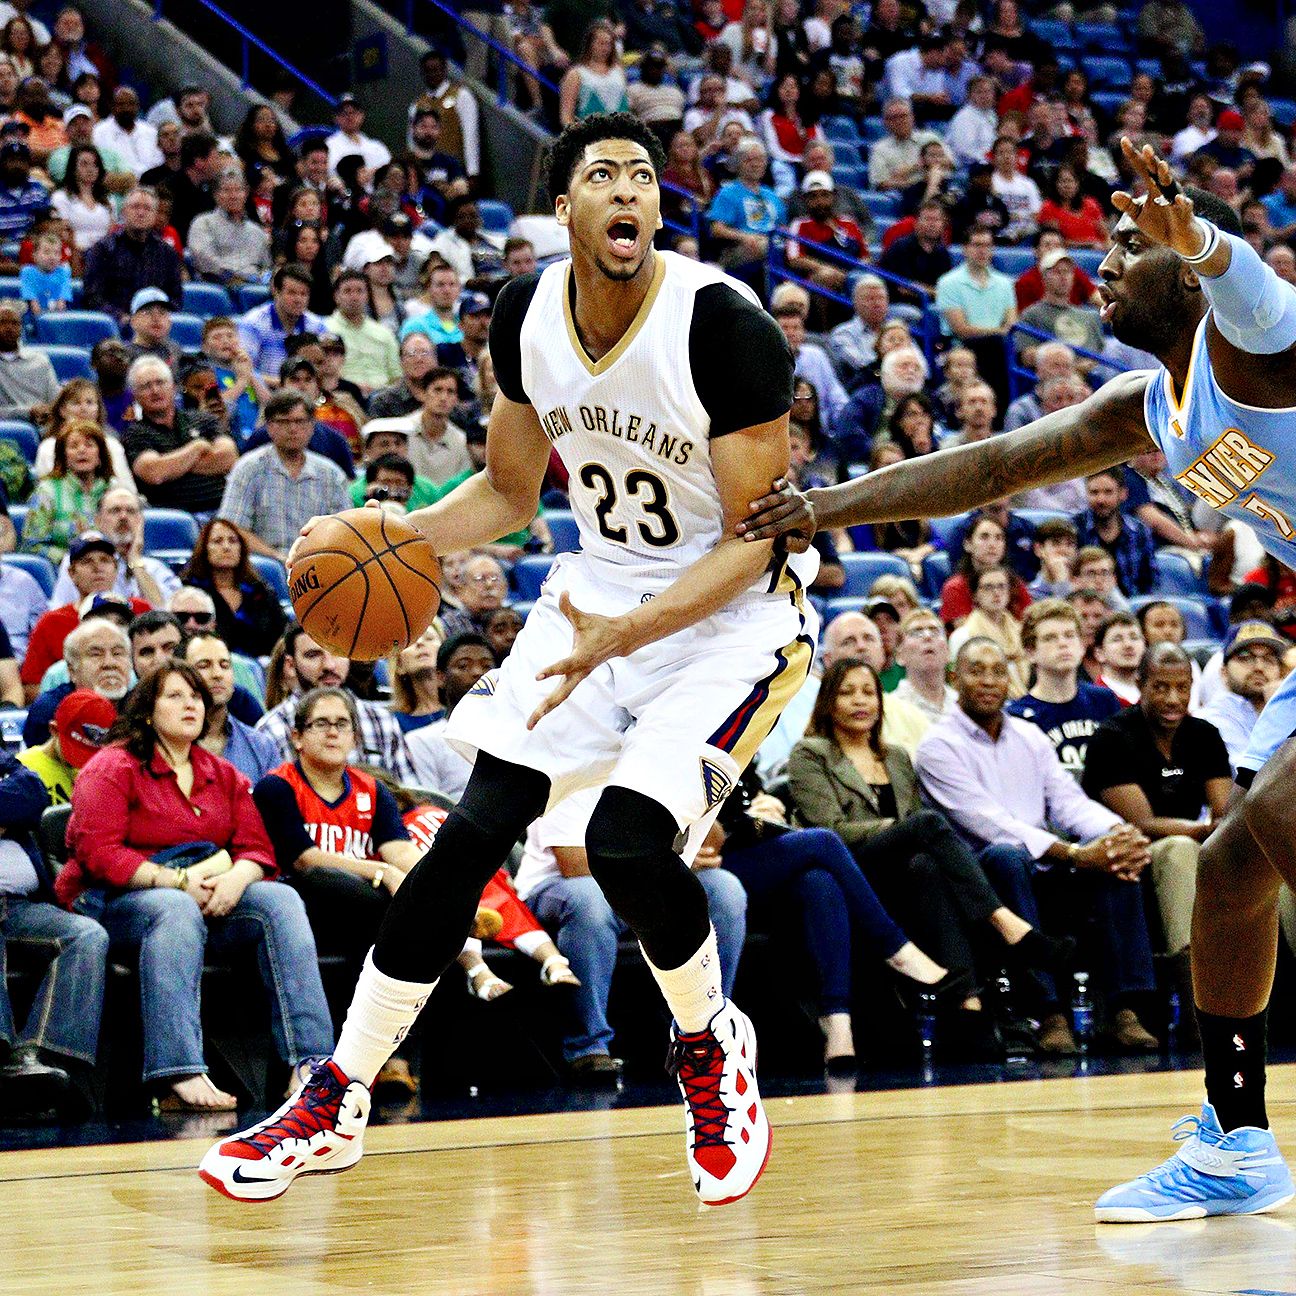 Anthony Davis of New Orleans Pelicans records historic scoreline in loss1296 x 1296